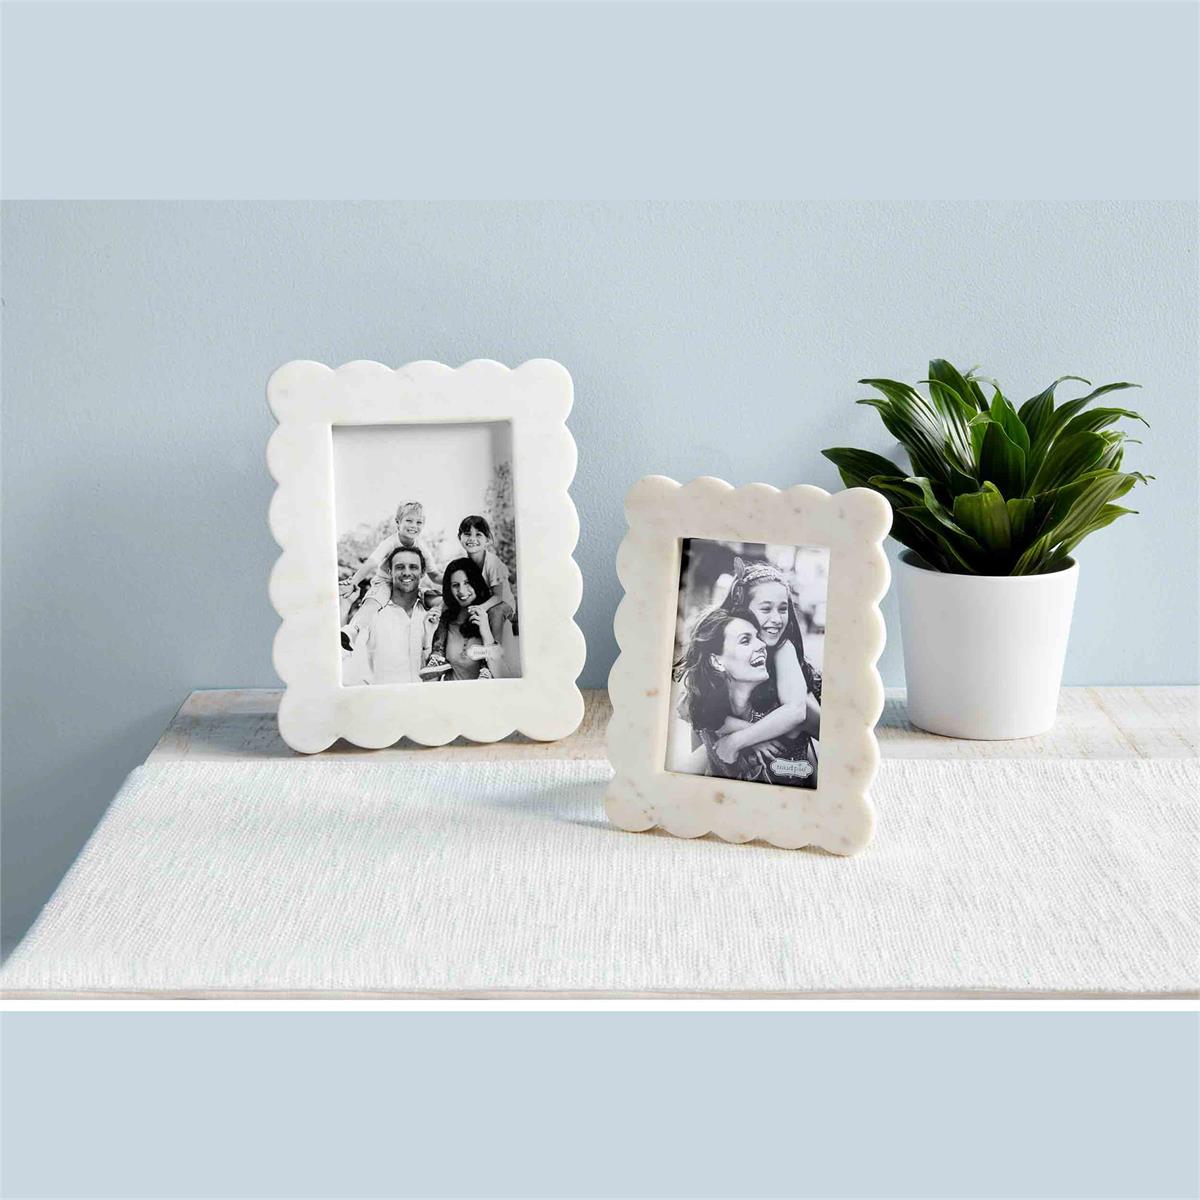 both sizes of scalloped marble frames displayed on a white dresser next to a potted leafy plant